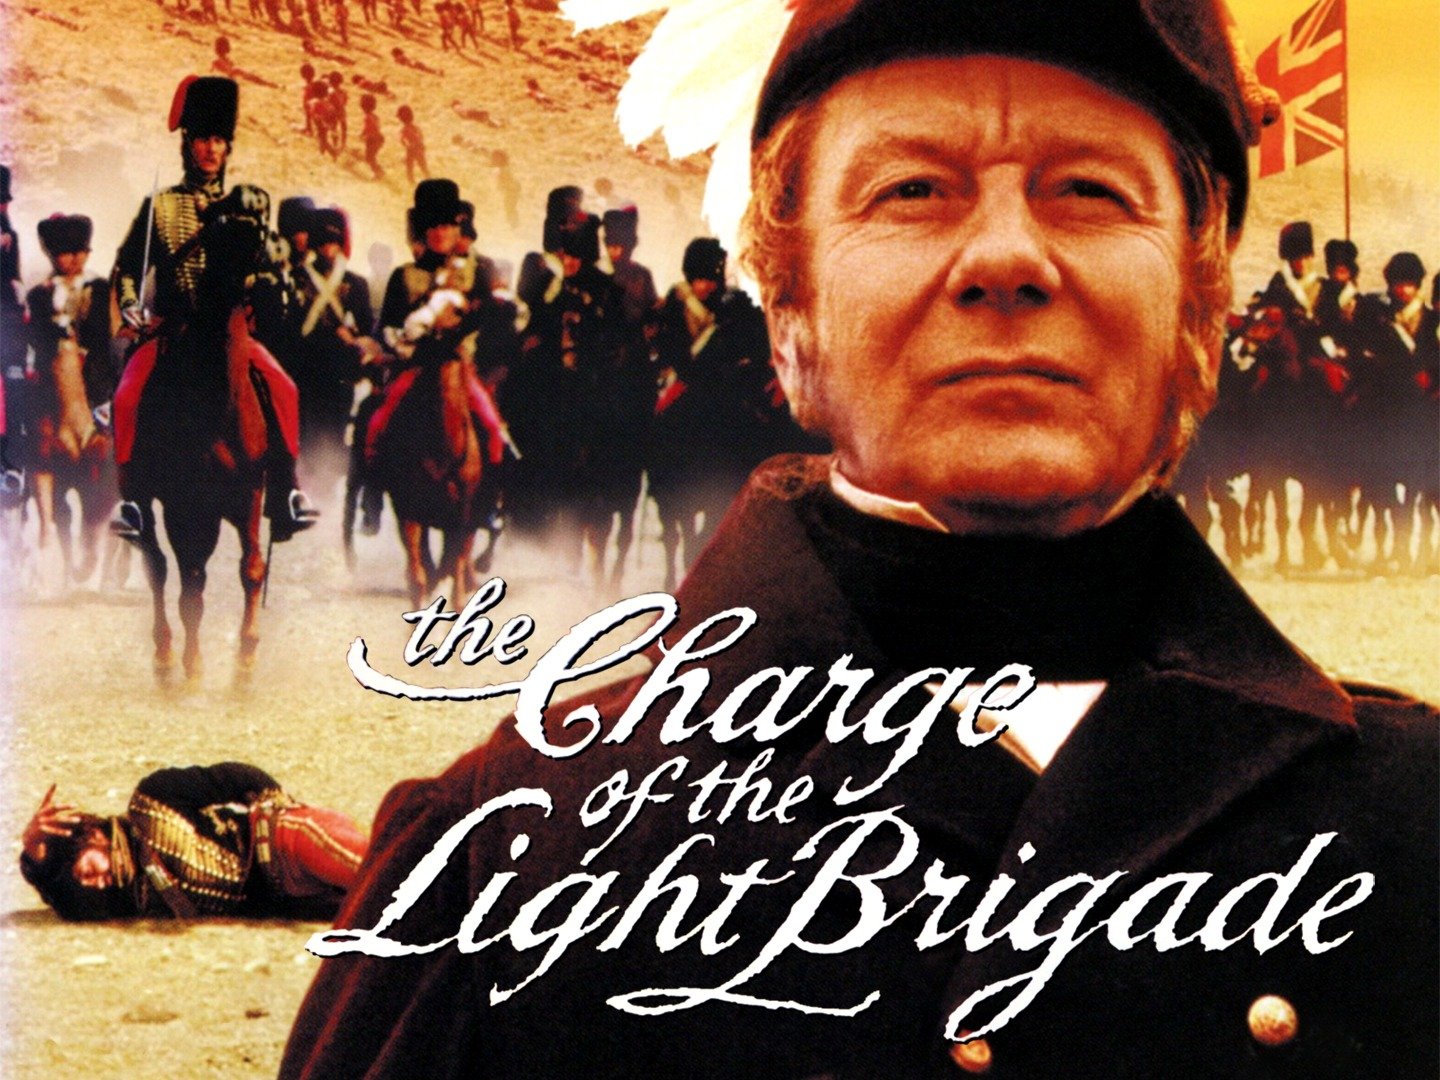 what is a light brigade